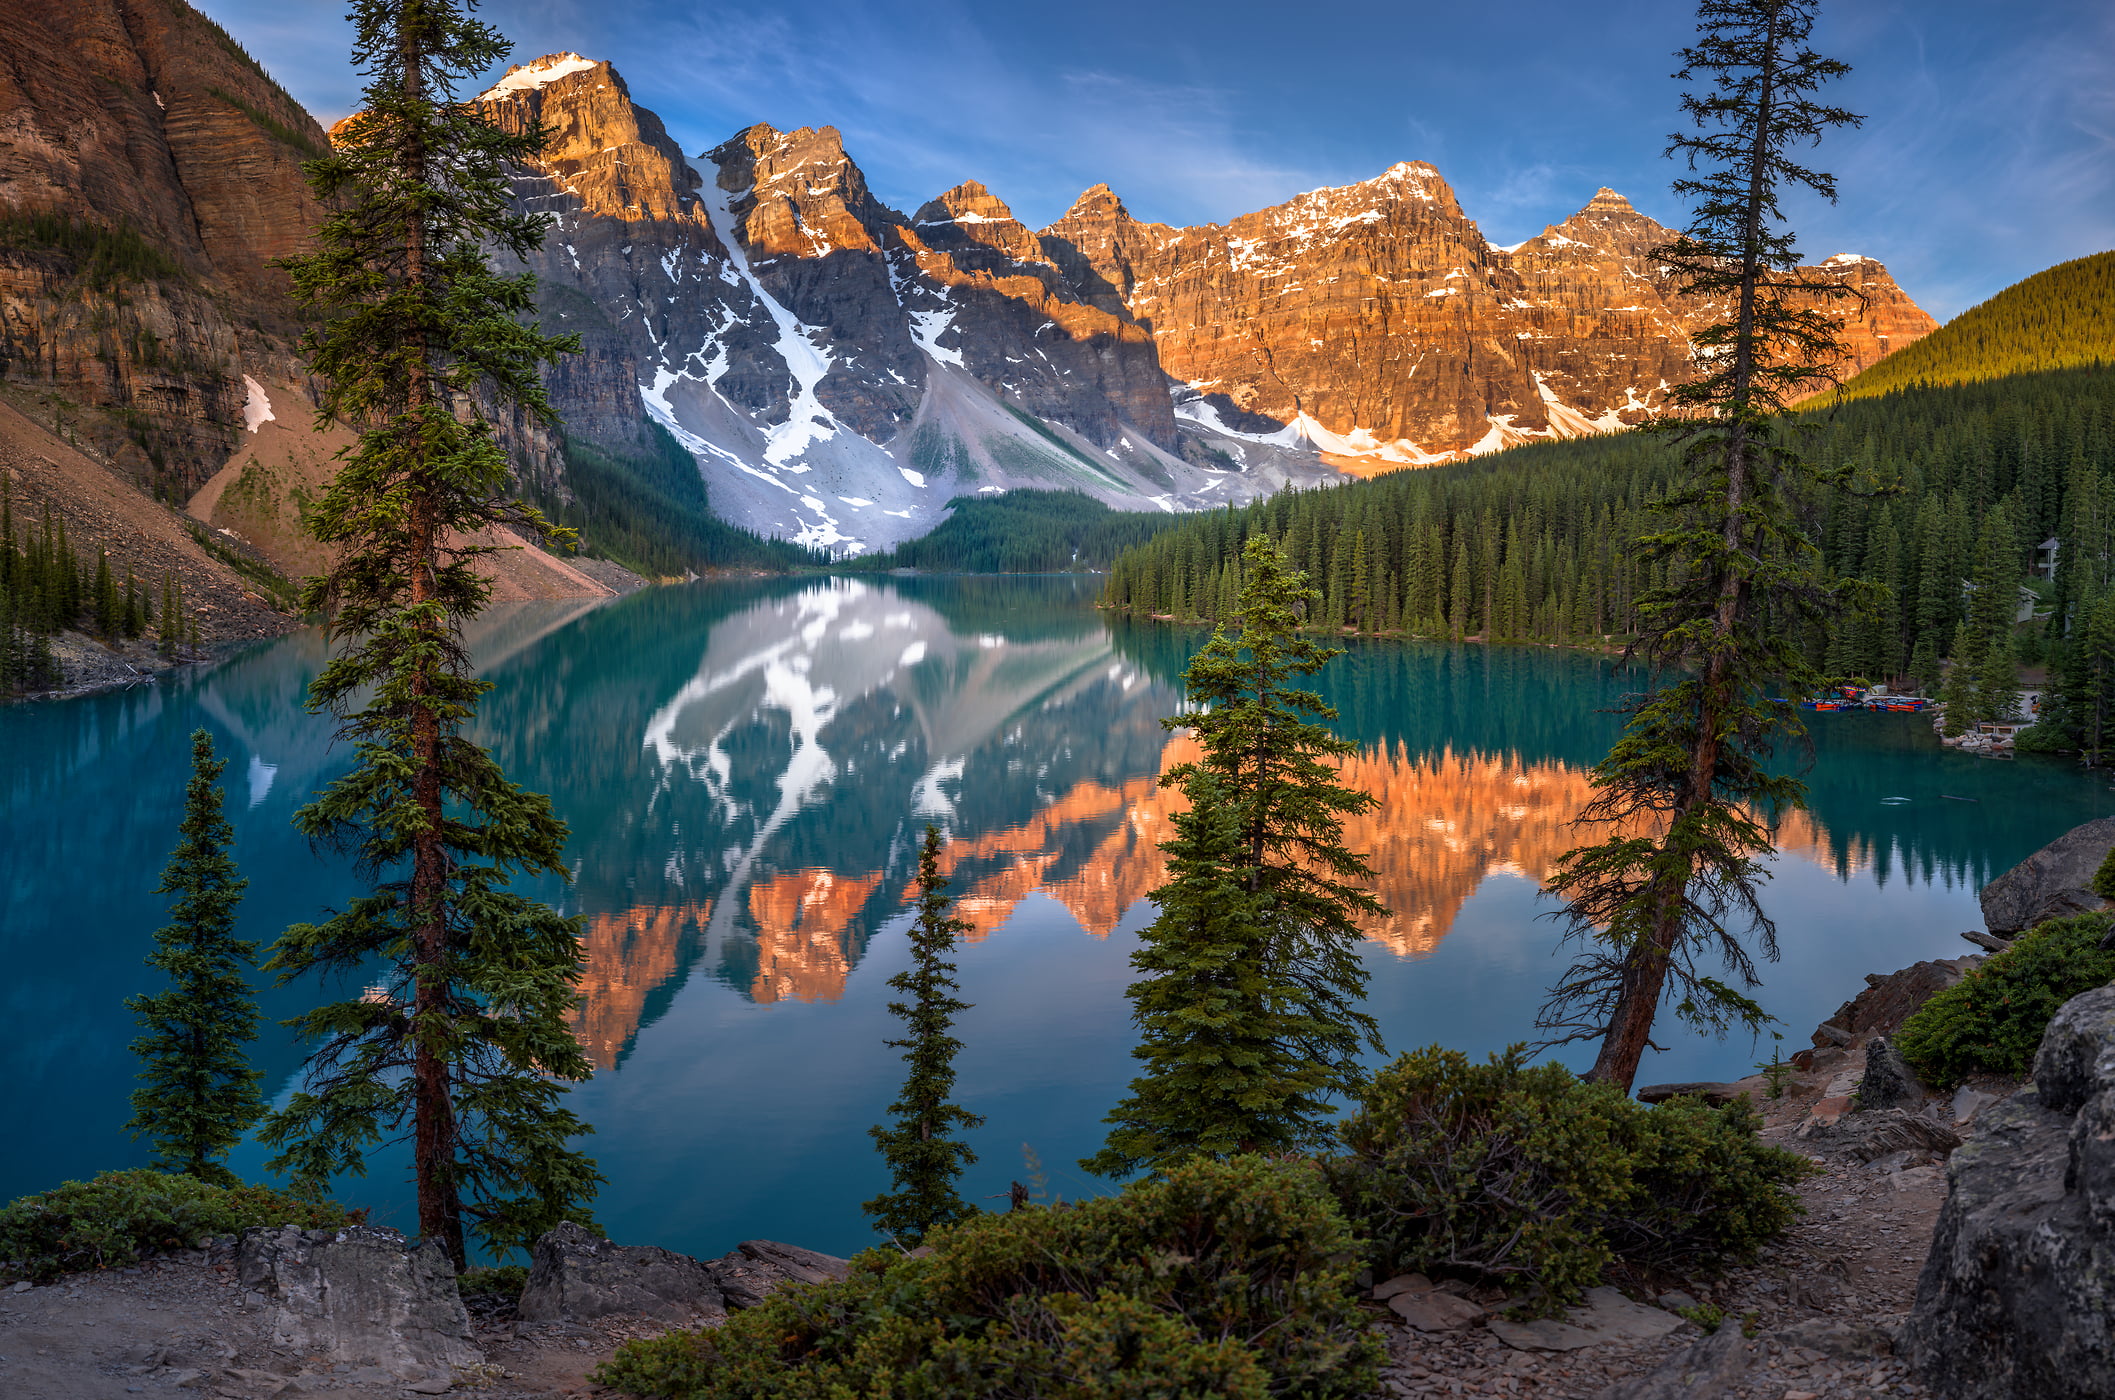 494 megapixels! A very high resolution, large-format VAST photo print of Moraine Lake: a beautiful lake with mountains in the background and reflected in the water; fine art nature landscape photograph created by Tim Shields in Banff National Park, Canada.